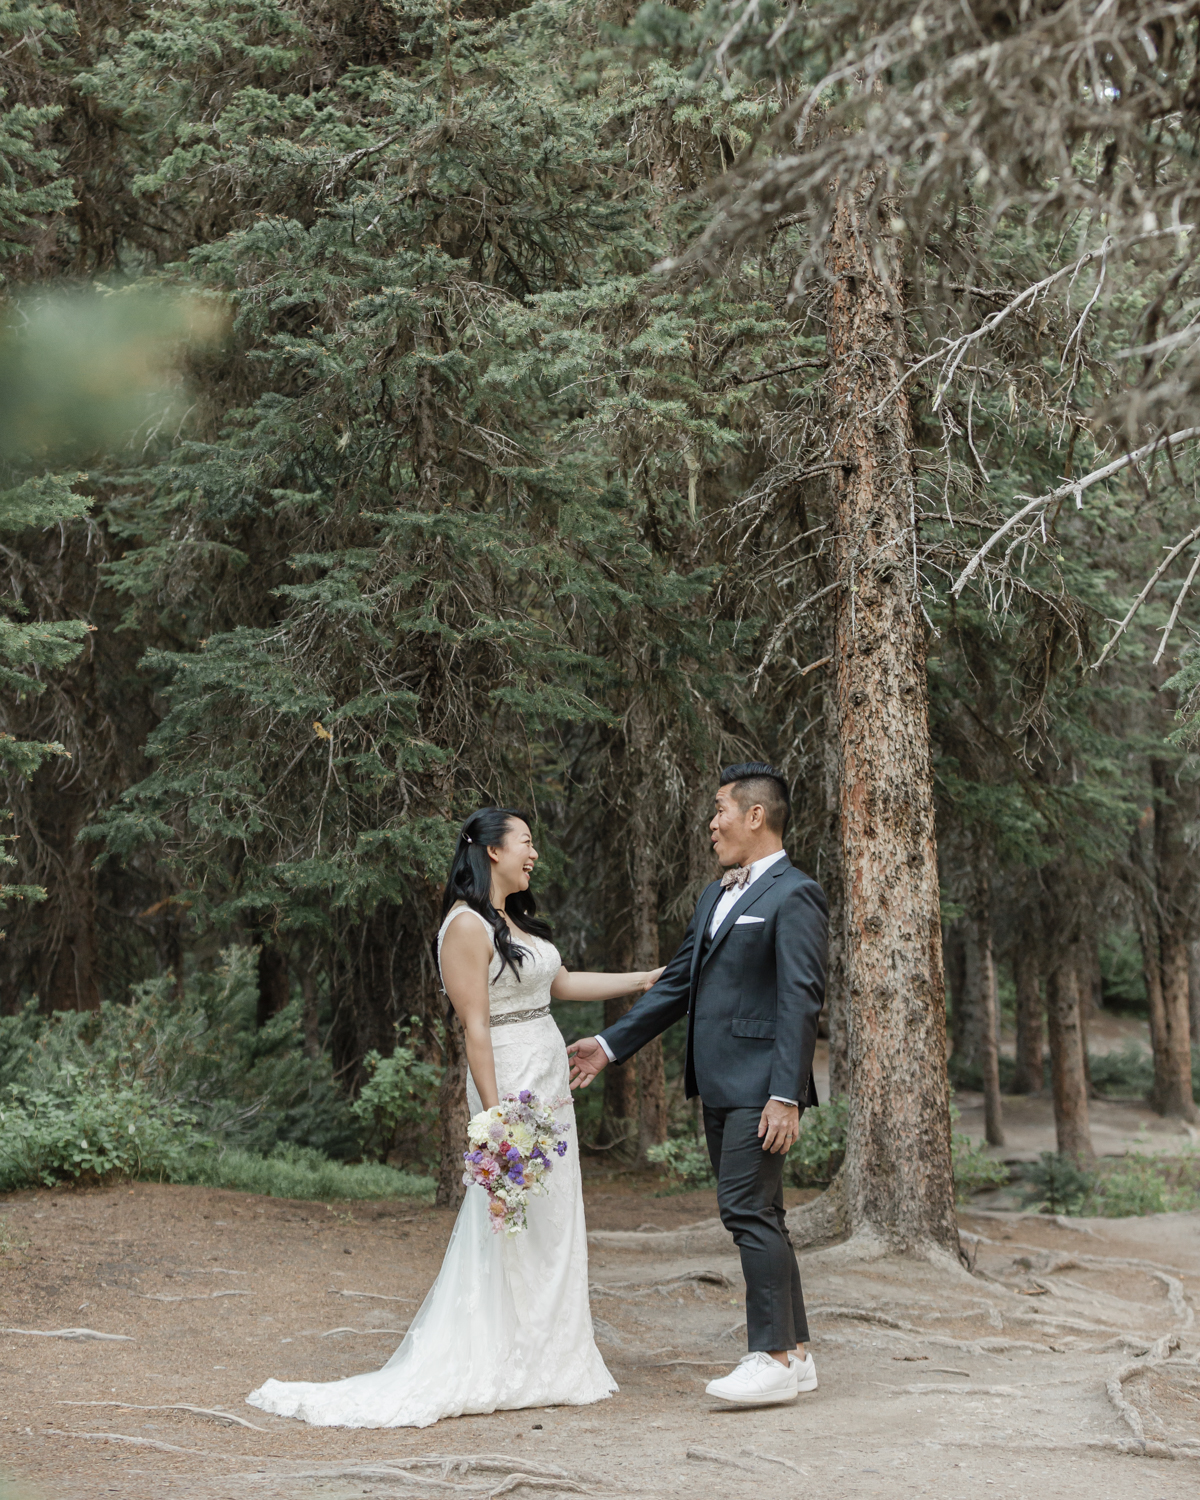 Reveal Elopement in Banff National Park in the forest